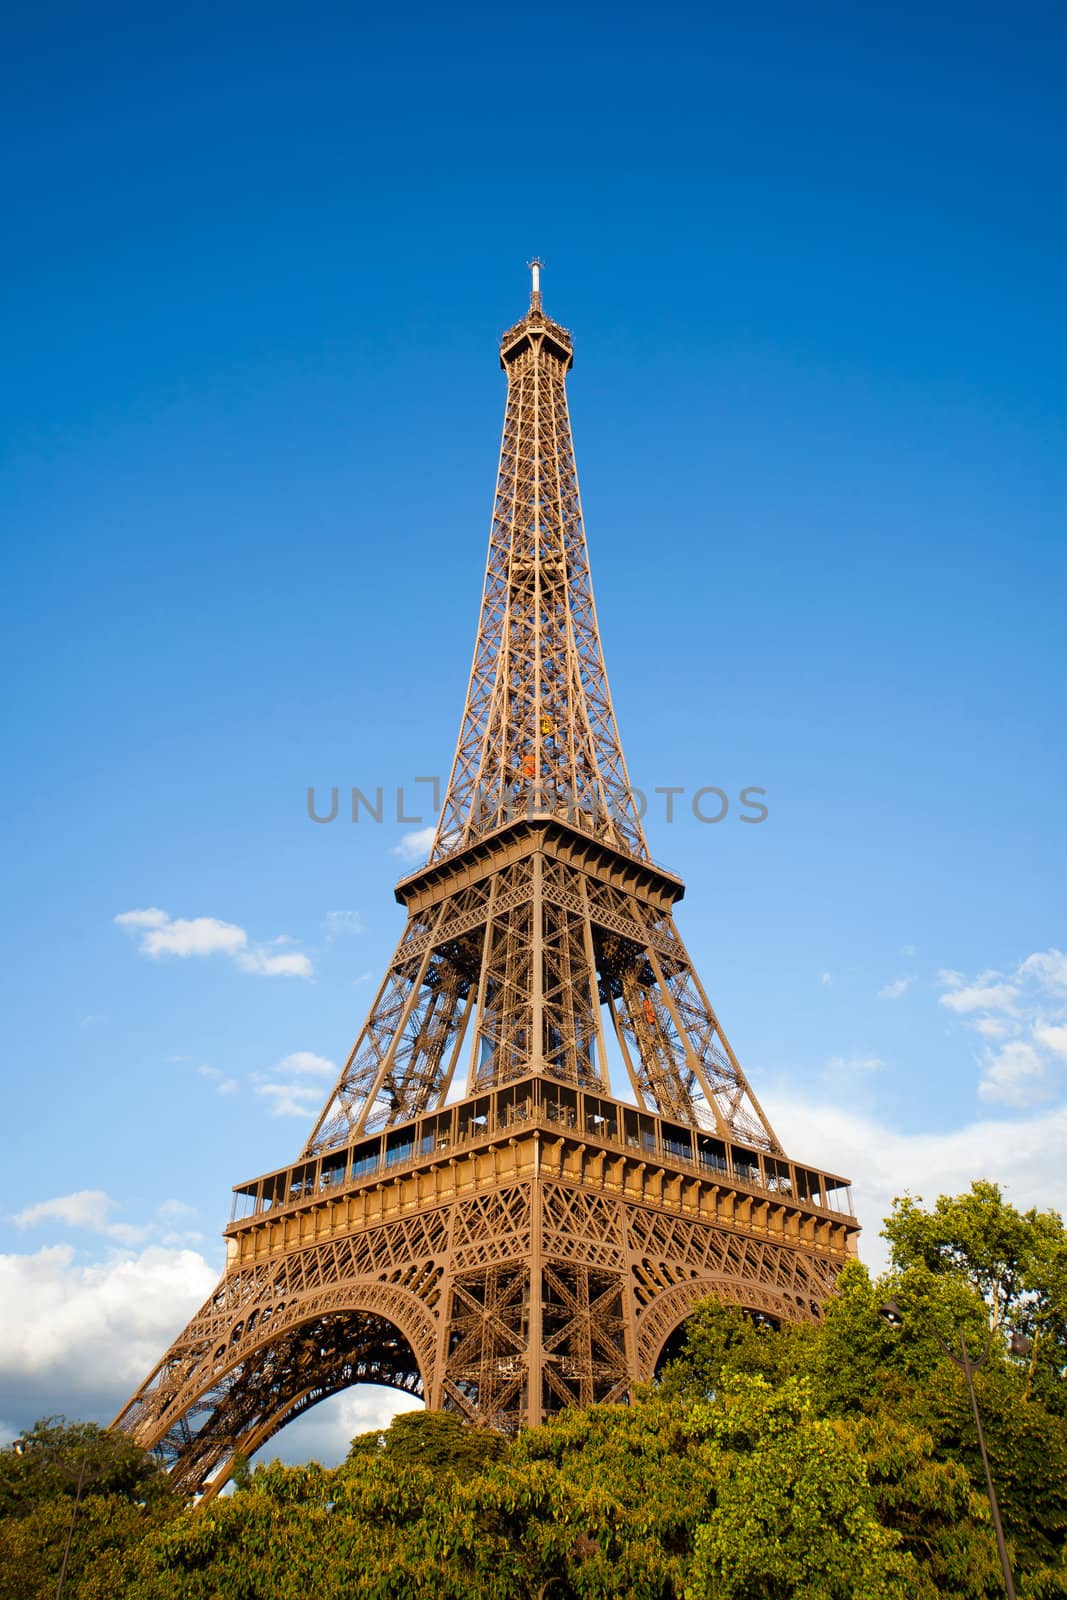 Eiffel Tower during the day. Paris, France by furzyk73